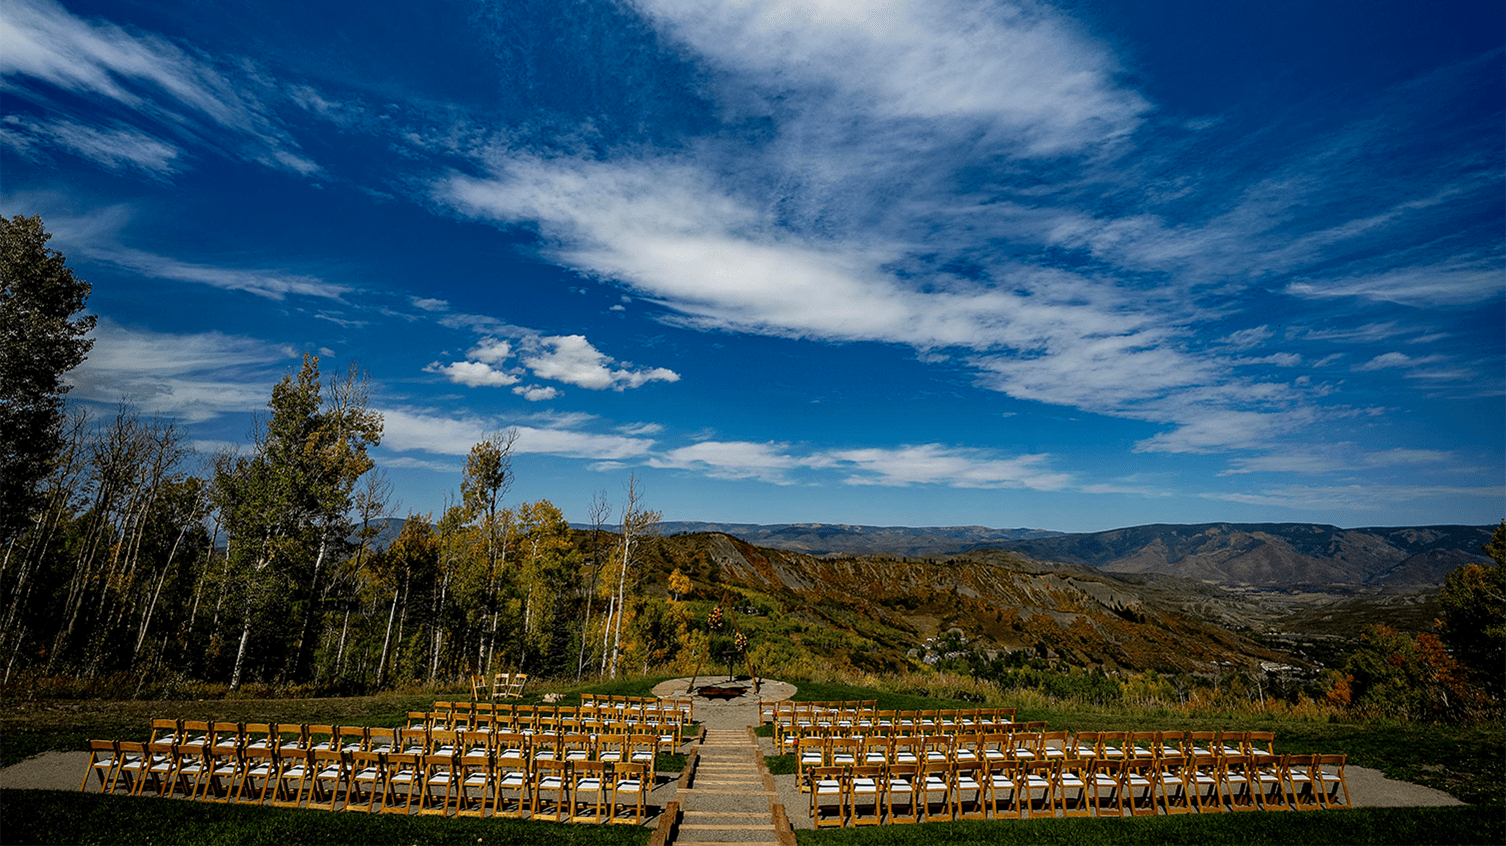 Empty wedding chairs lined up in front alter, before an outdoor wedding at Snowmass. Blue sky and light falls colors surround the space